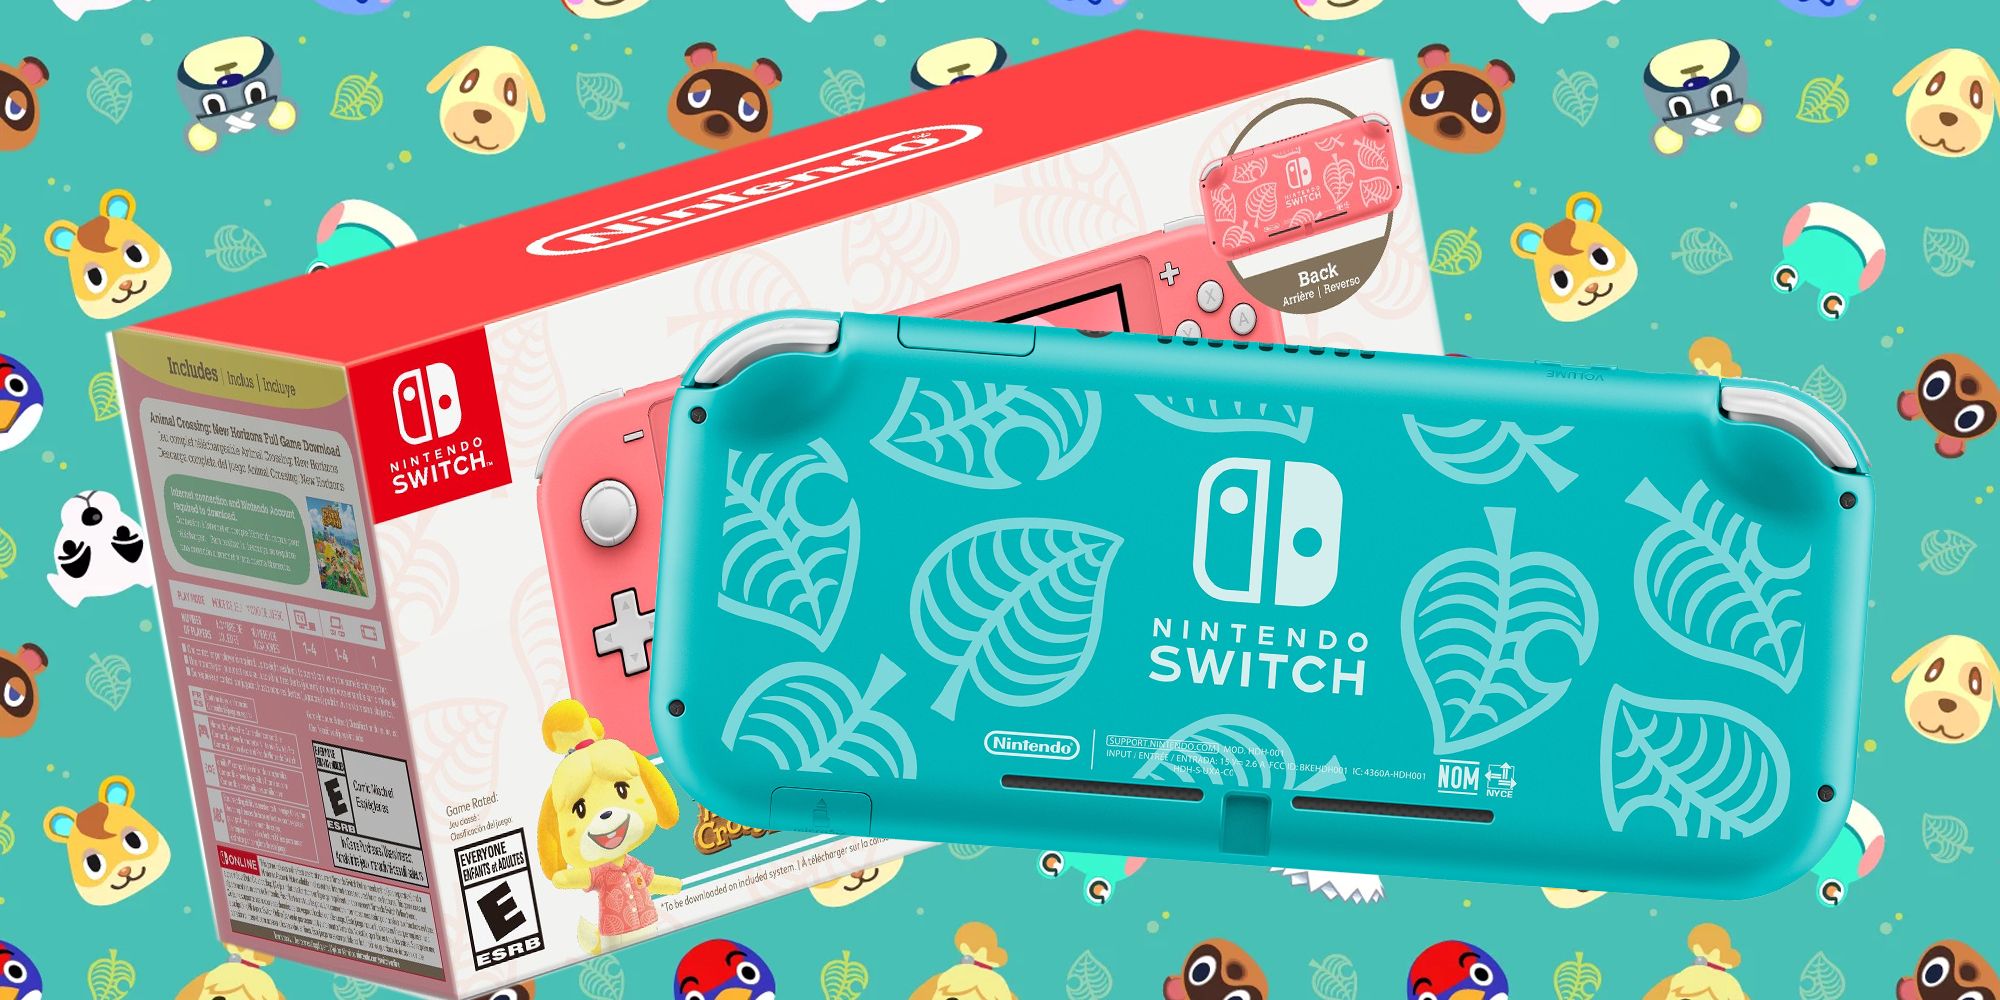 special edition animal crossing switch lite consoles